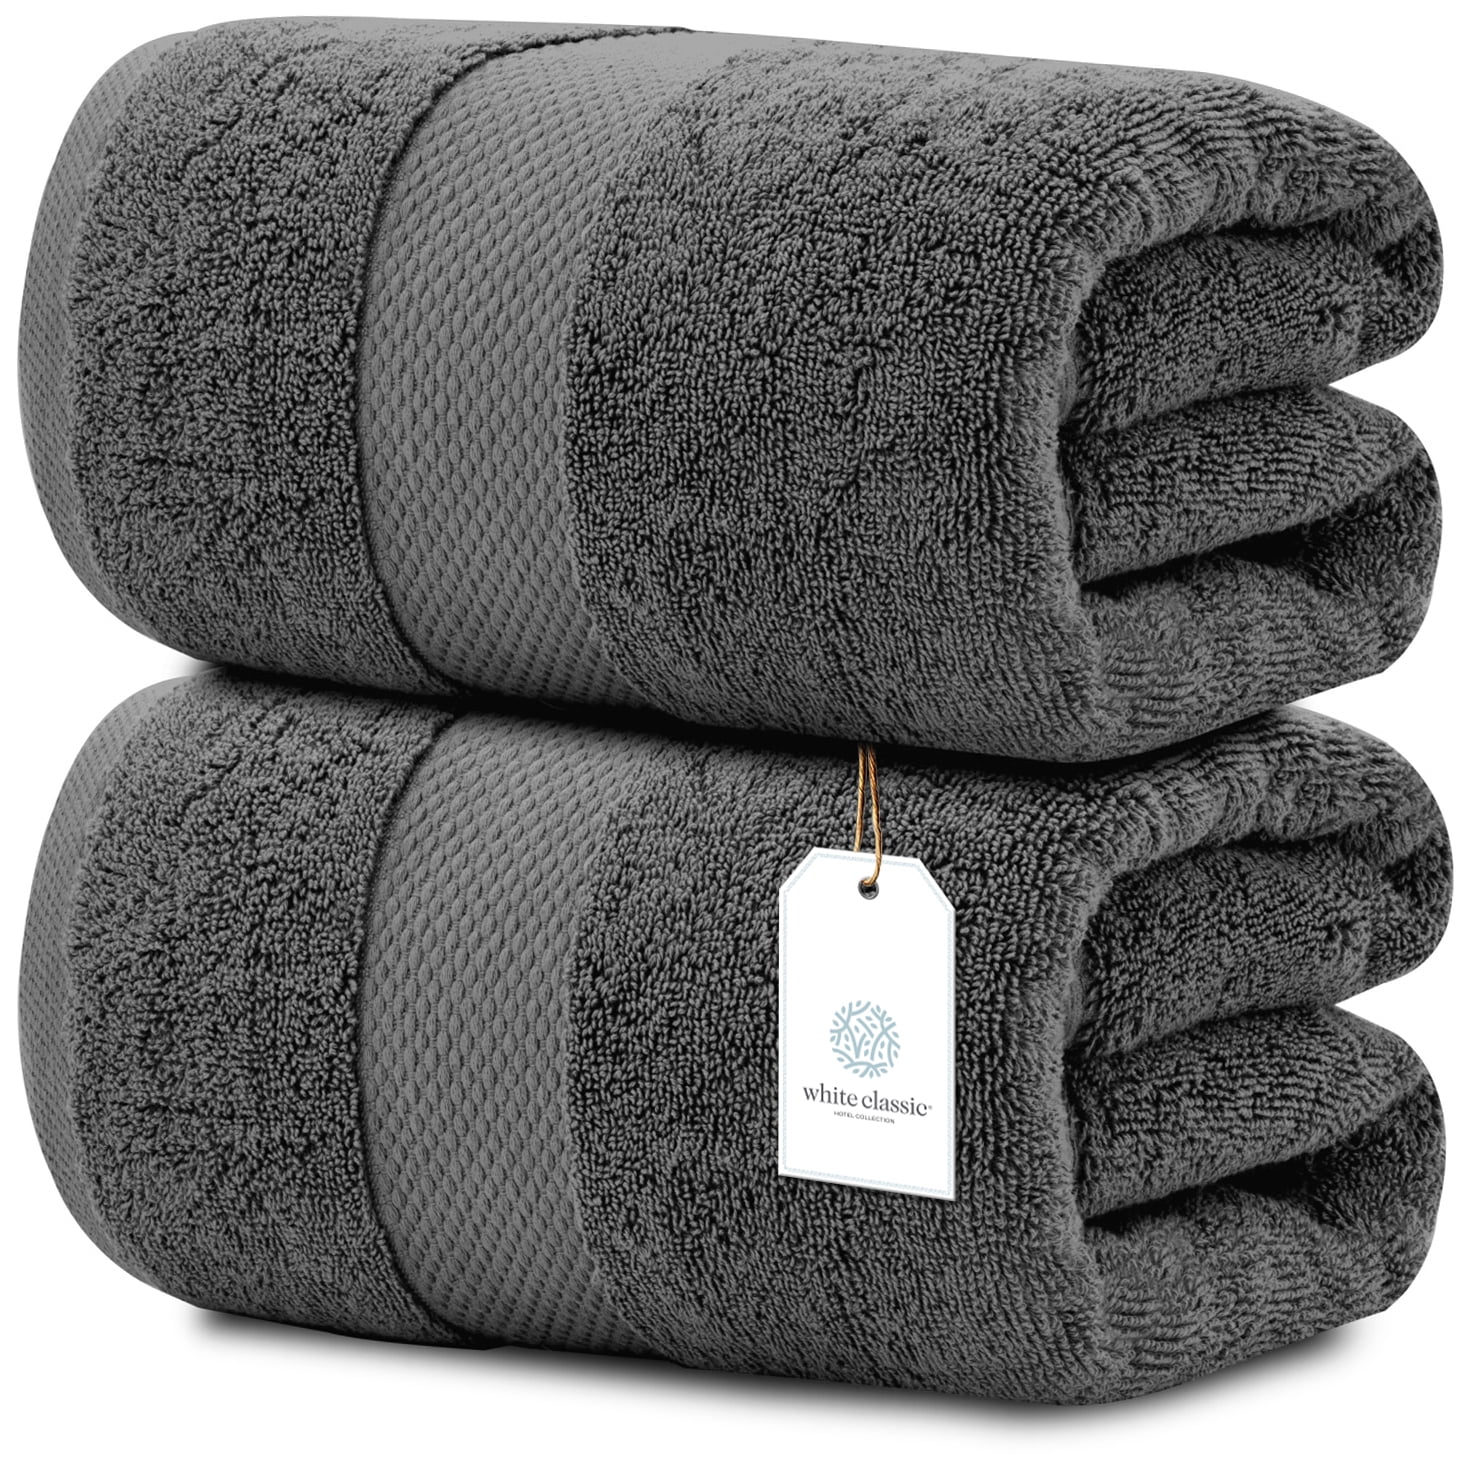 Towels set of 2 Luxury Hotel & Spa Towel Cotton Bamboo Bath Sheets 35x70 